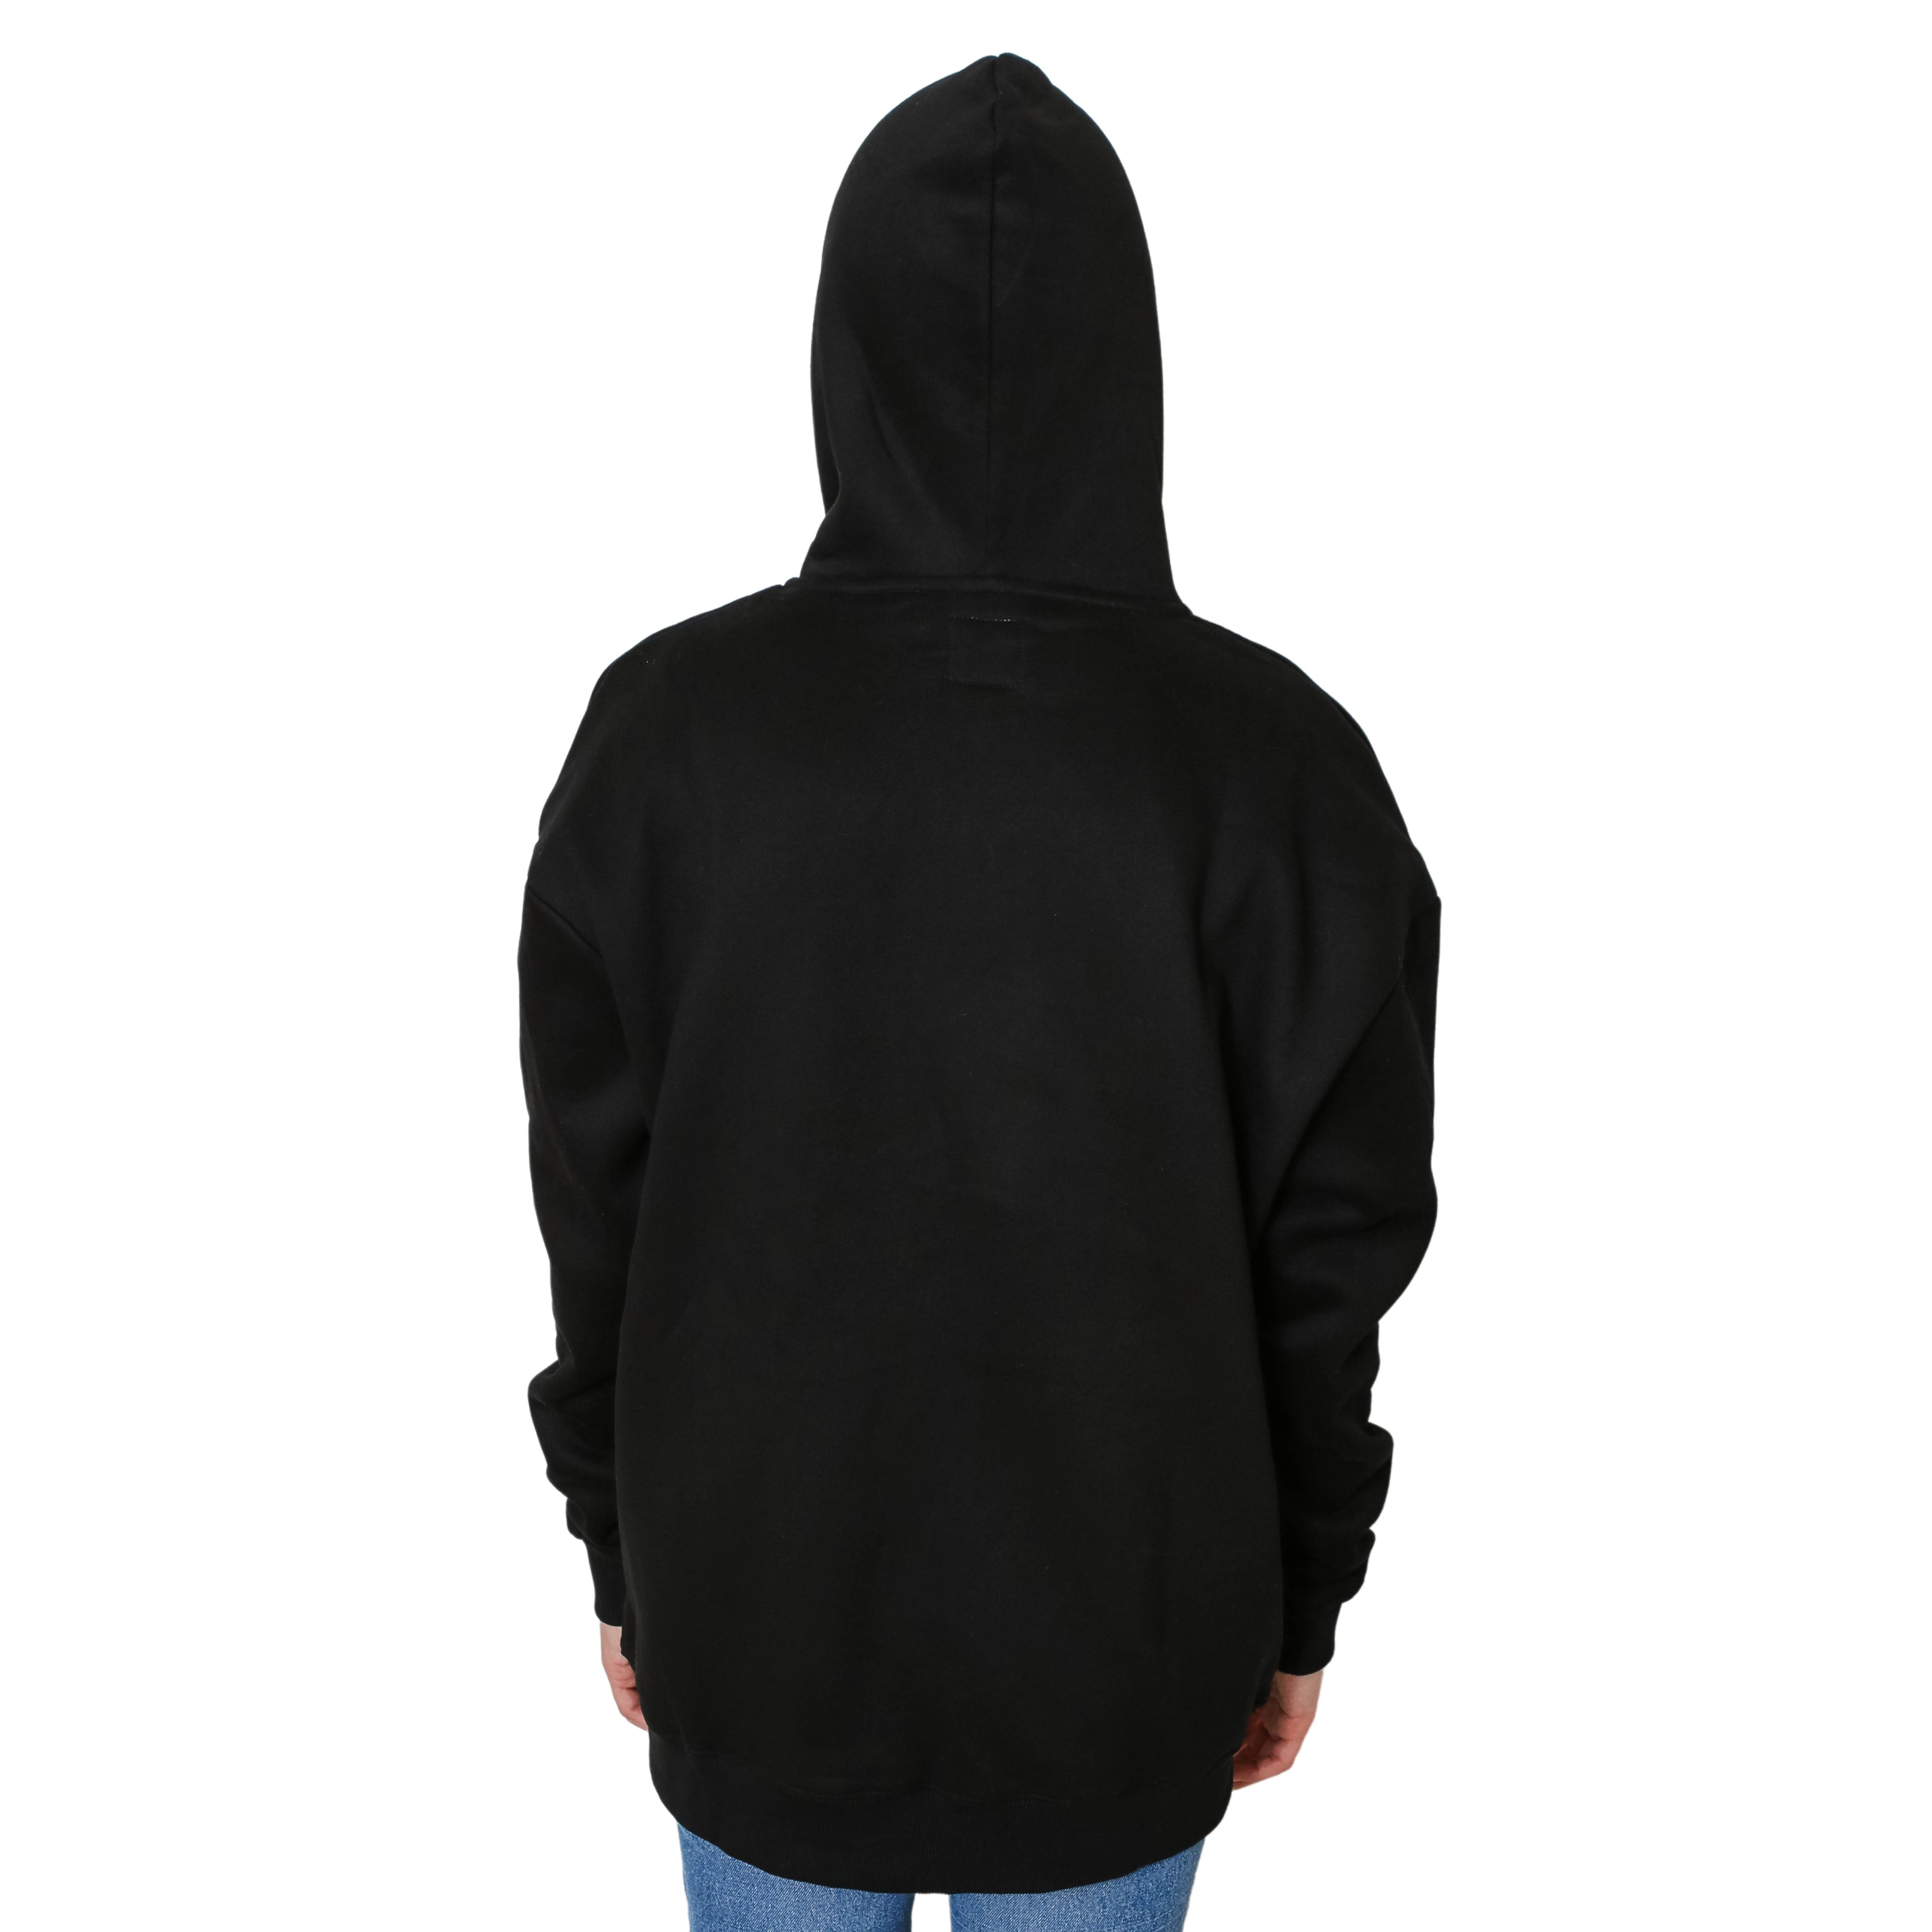 Arm Access Oversized Hoodies for Men and Women